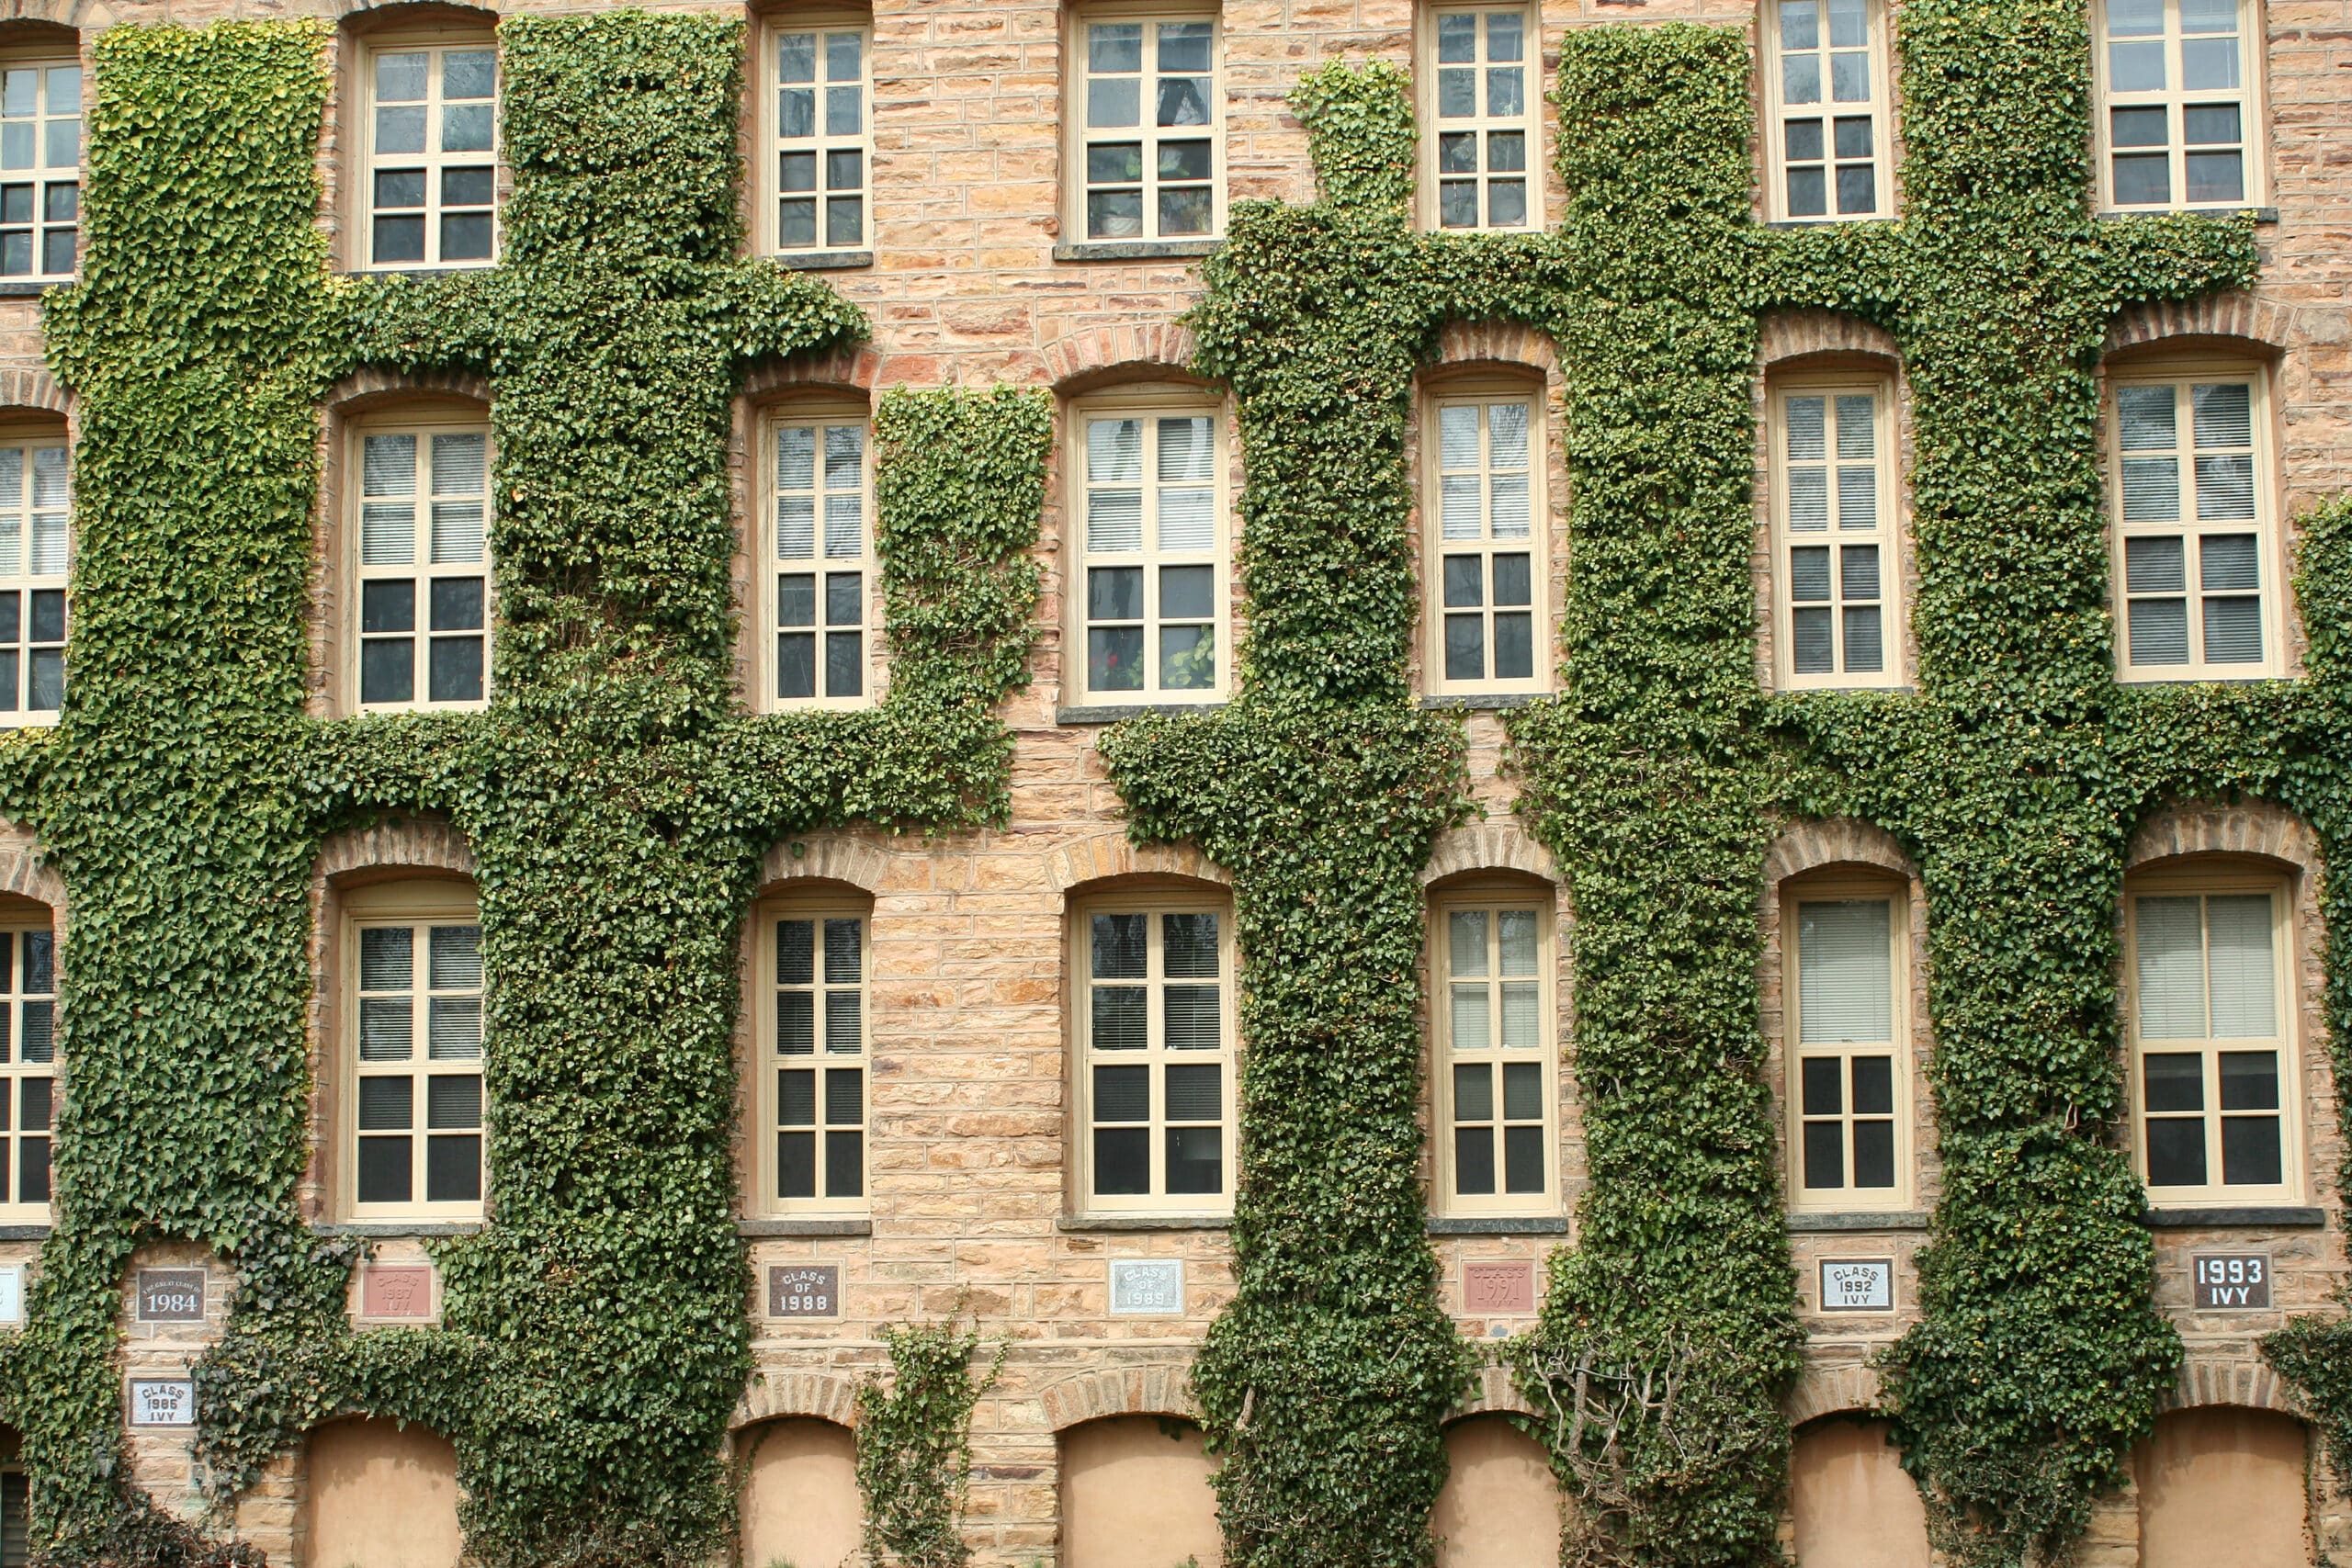 multi-story building with ivy growing on the outside - Messick Plumbing, Princeton Plumber